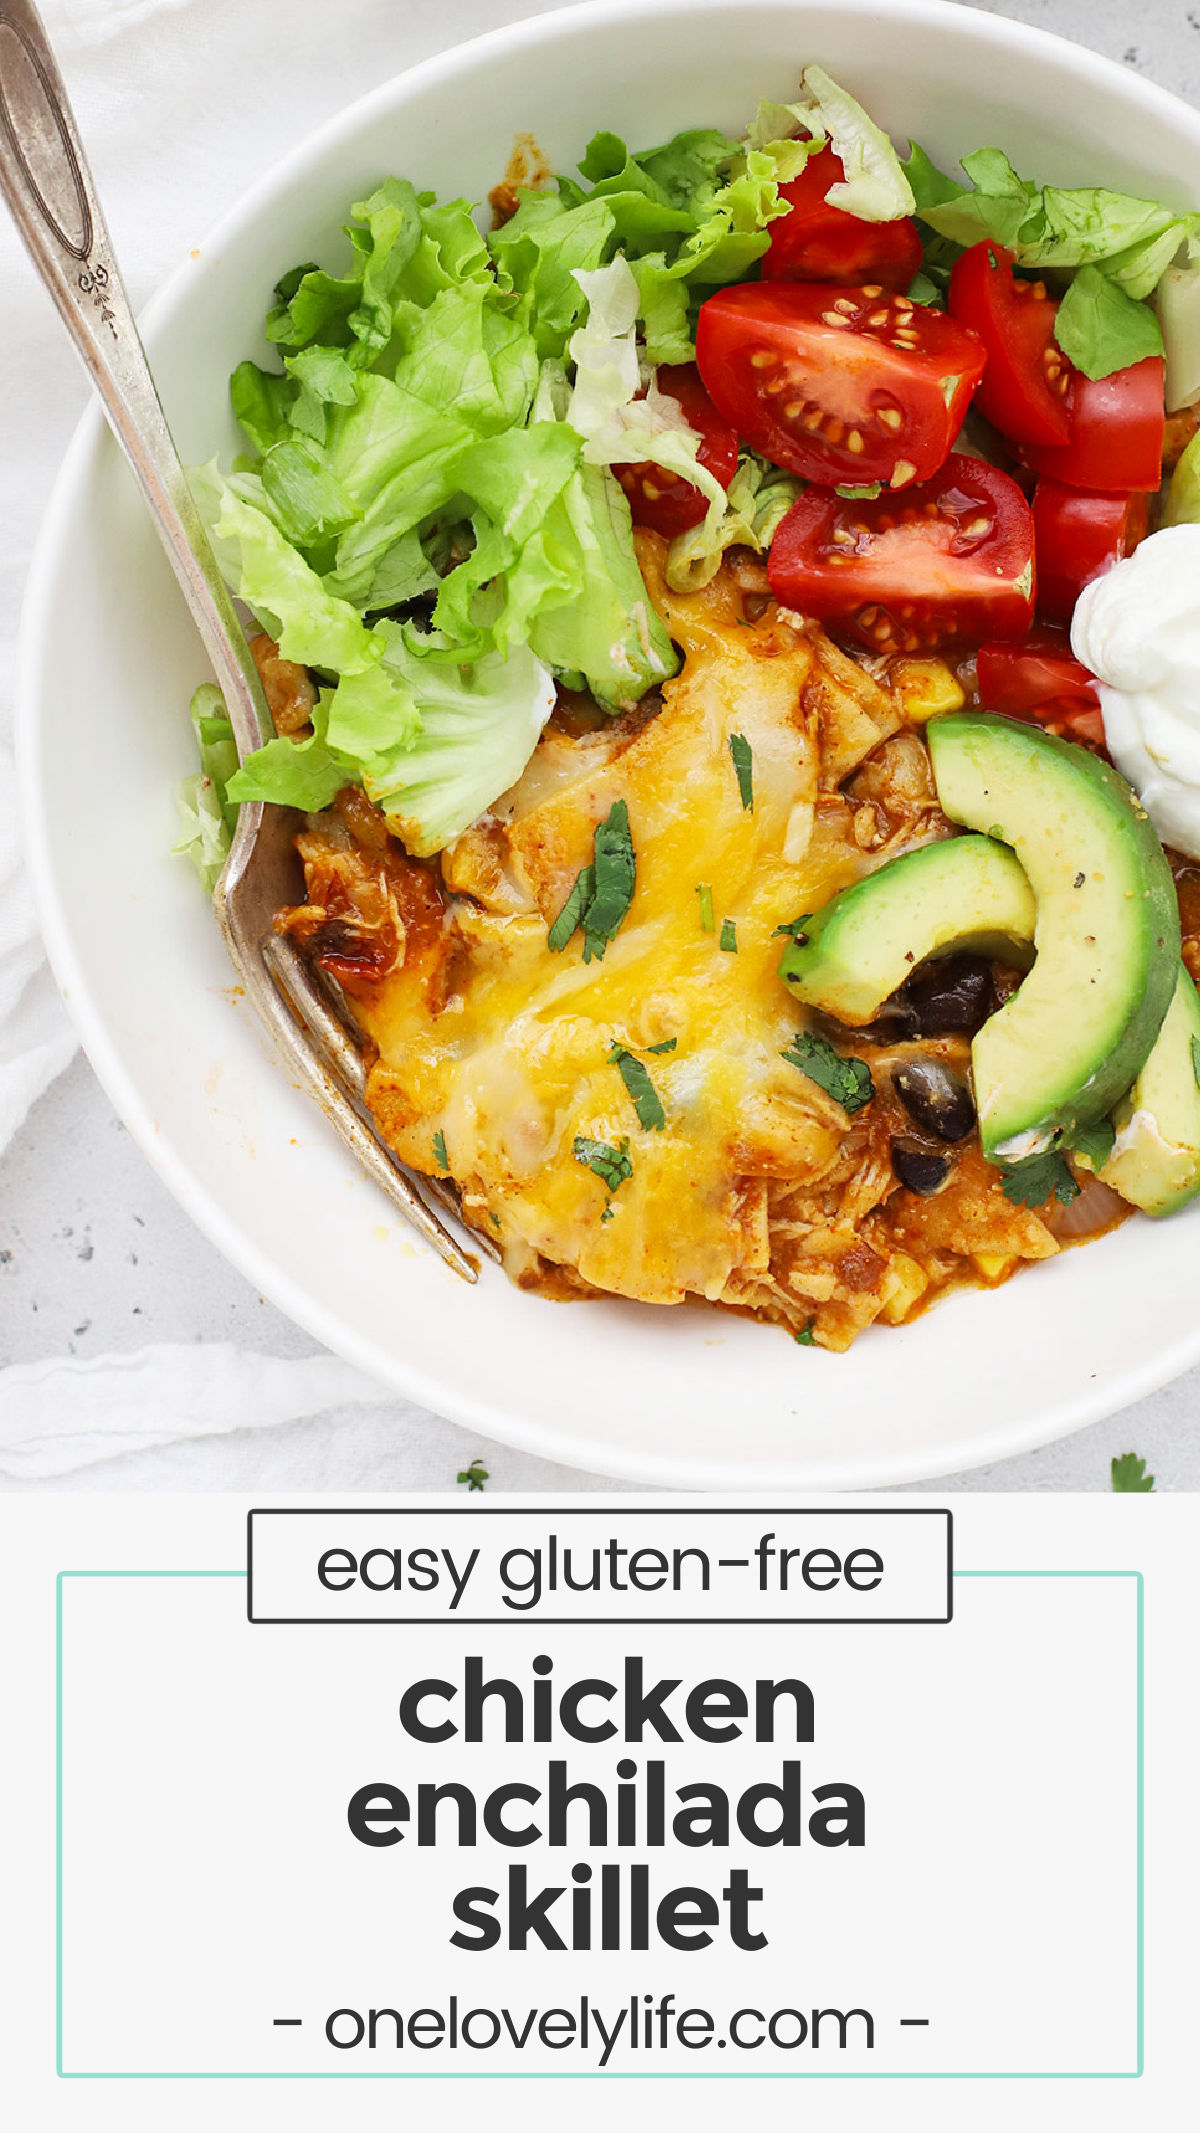 Easy Chicken Enchilada Skillet - This enchilada bake is made in one pan and PACKED with delicious flavor. You'll love this easy dinner recipe! // One Pan Dinner // Skillet Dinner / Easy Healthy Dinner Ideas / Healthy Dinner Recipe / Gluten Free Dinner / Enchilada skillet recipe / chicken enchilada skillet recipe / gluten free chicken enchilada skillet / gluten free one pan dinner